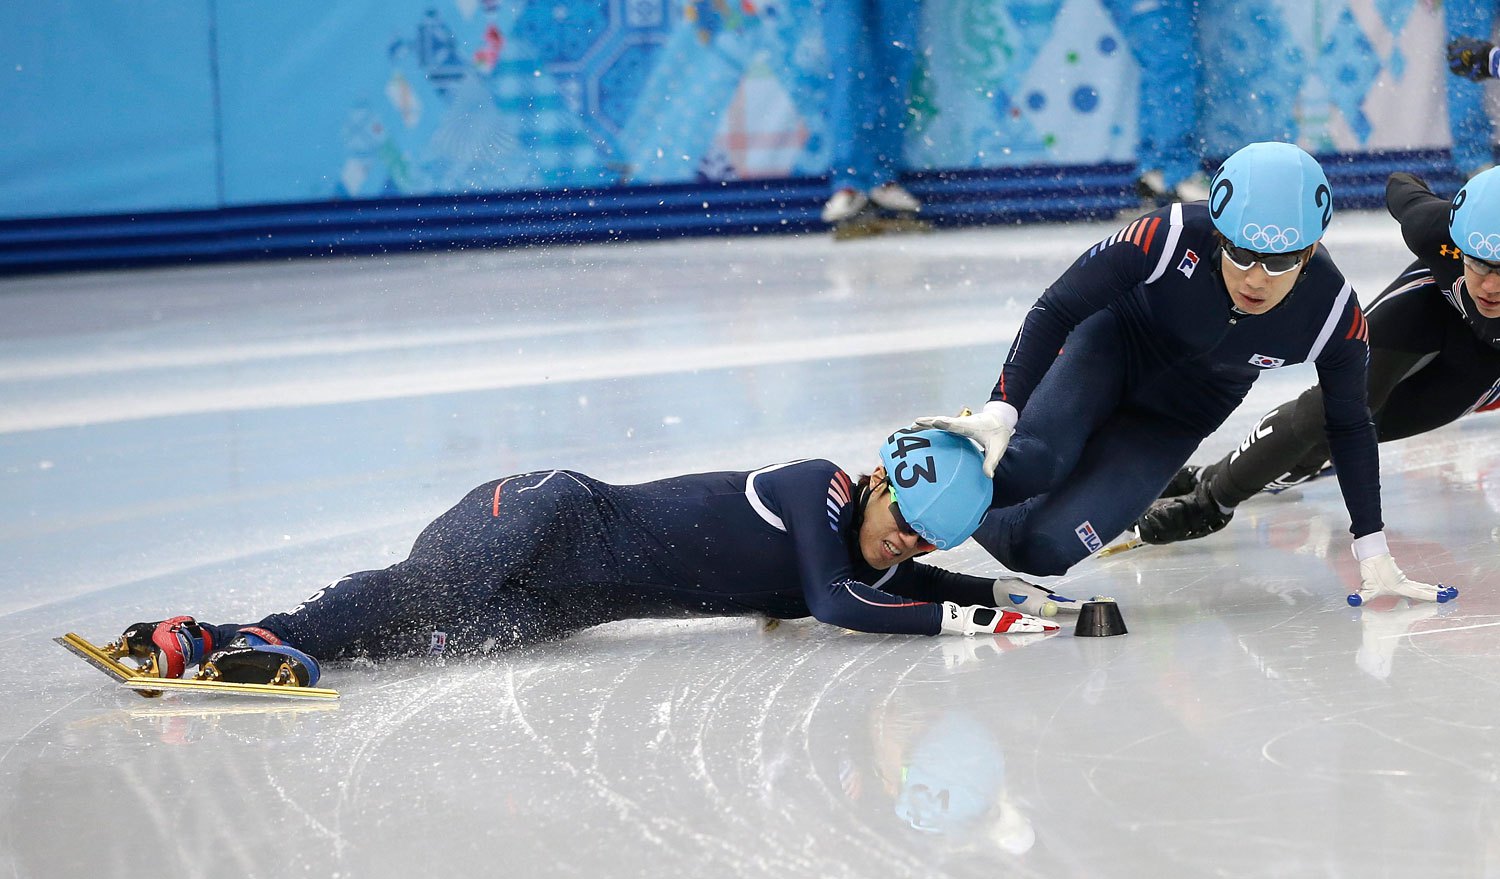 Sin Da-woon of South Korea, crashes as Lee Han-bin of South Korea goes down with him in a men's 1500m short track speedskating semifinal at the Iceberg Skating Palace during the 2014 Winter Olympics, Feb. 10, 2014, in Sochi.